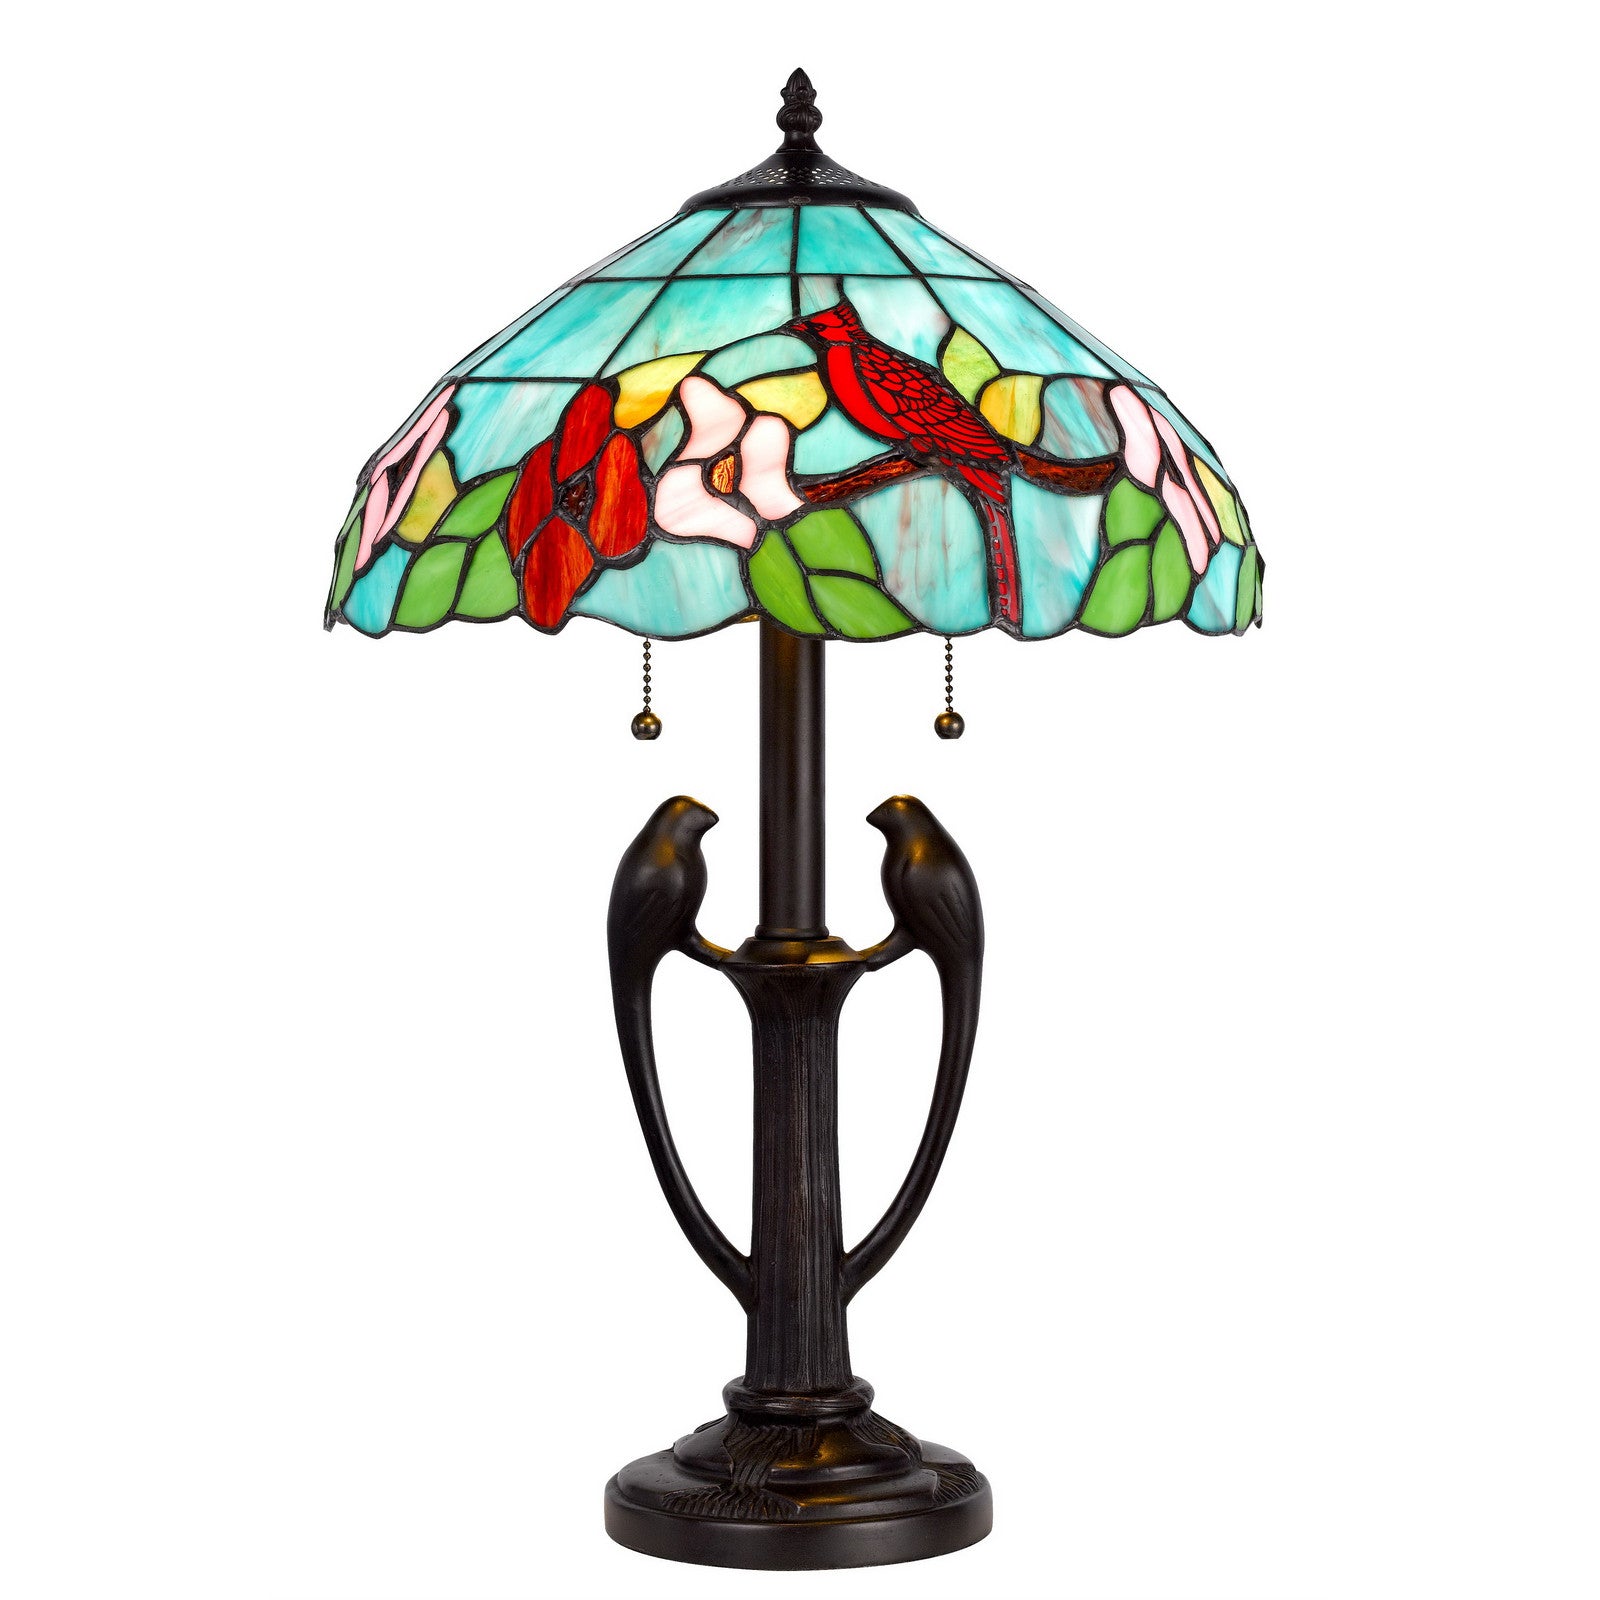 22" Bronze Two Light Tiffany Table Lamp With Aqua and Red Floral Shade